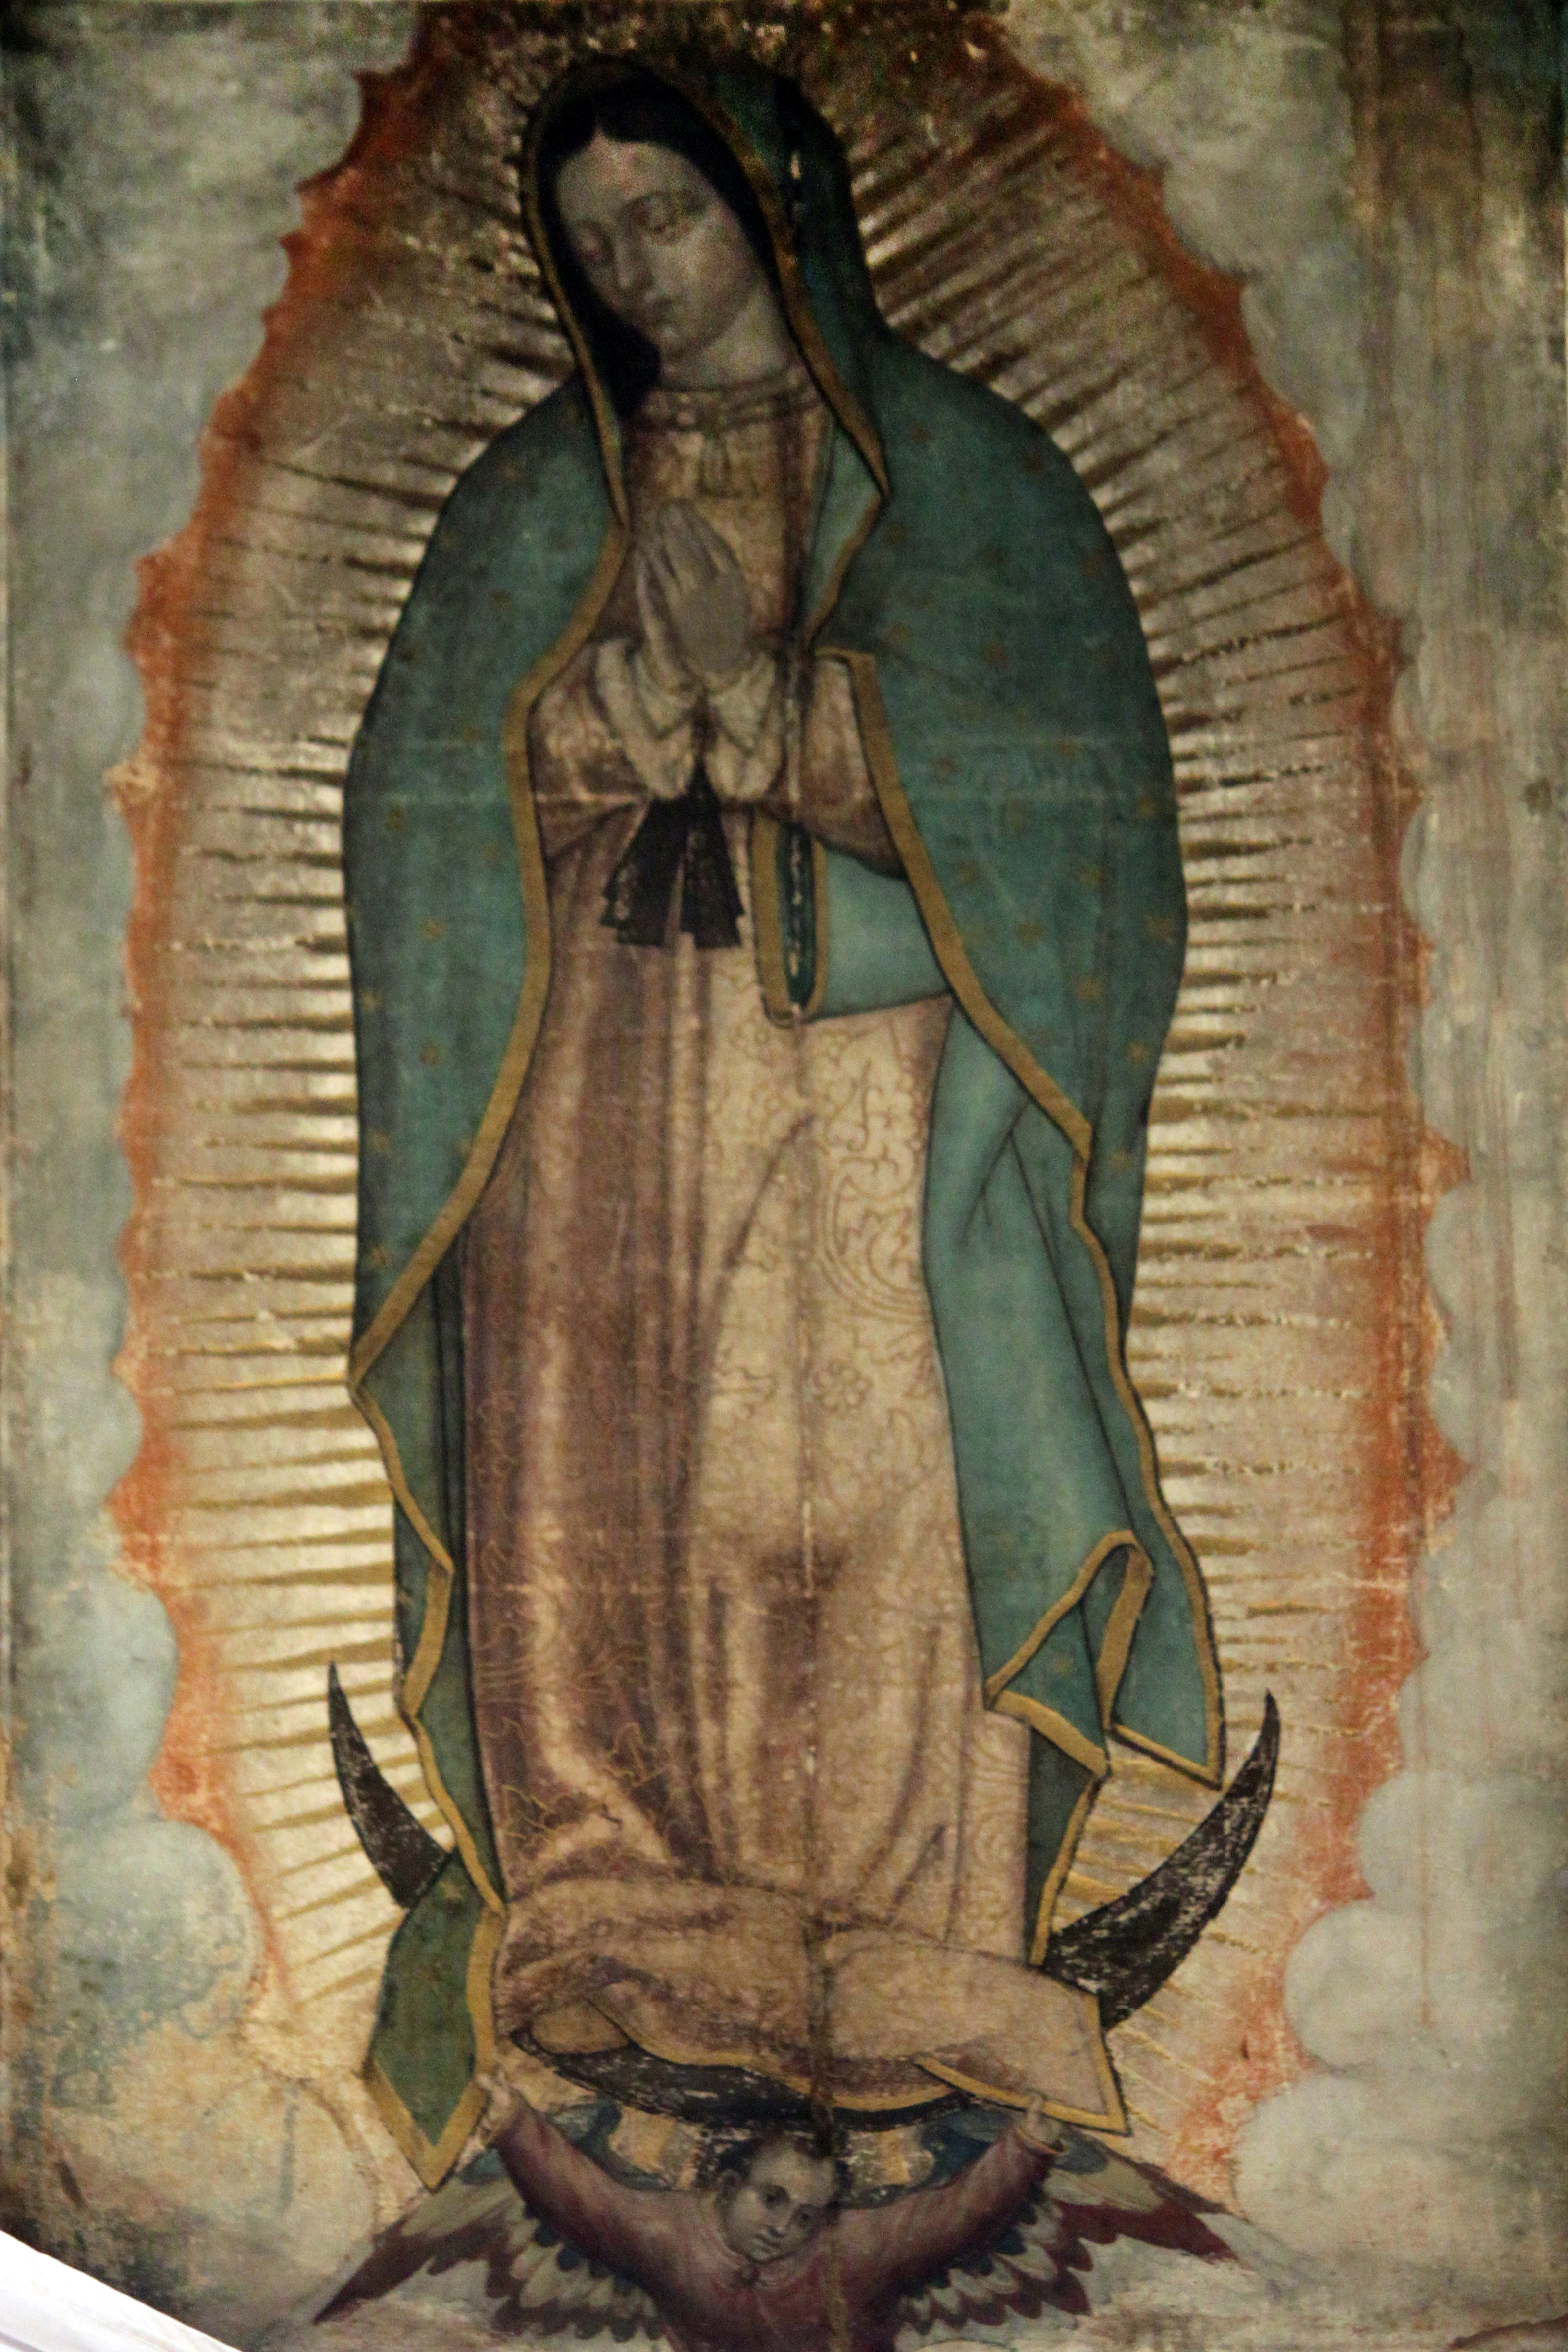 Original Picture of Our Lady of Guadalupe (also known as the Virgin of Guadalupe) shown in the Basilica of Our Lady of Guadalupe in México City. The Catholic Church considers the image of the Virgin of Guadalupe imprinted on the cloak of Juan Diego as a picture of supernatural origin. (PD-Art), via Wikimedia Commons